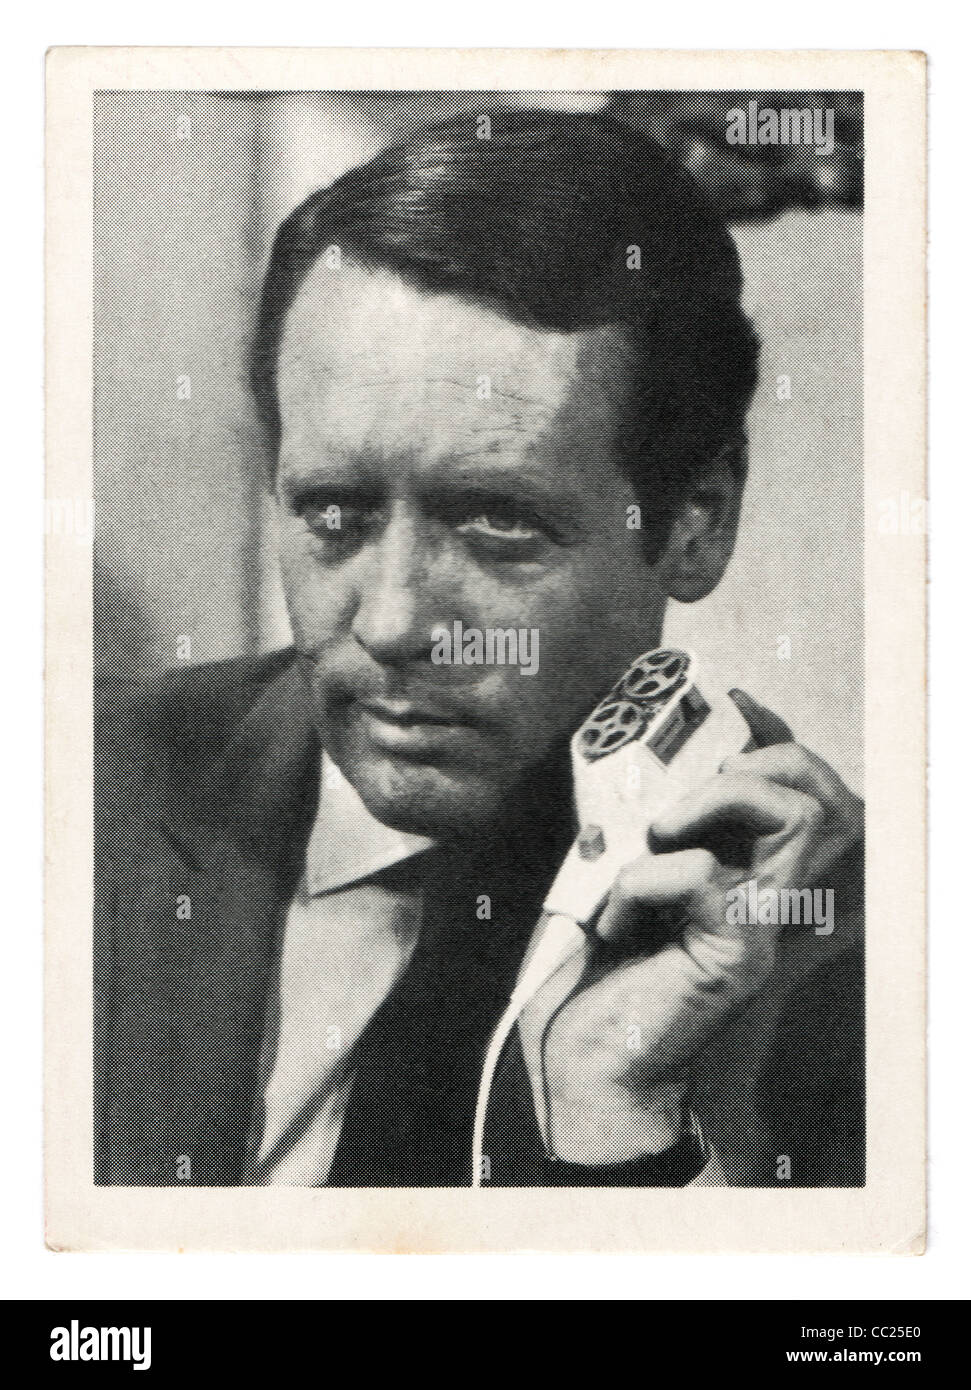 Danger Man bubble gum cards issued by Somportex in 1965 featuring Patrick McGoohan as John Drake Stock Photo